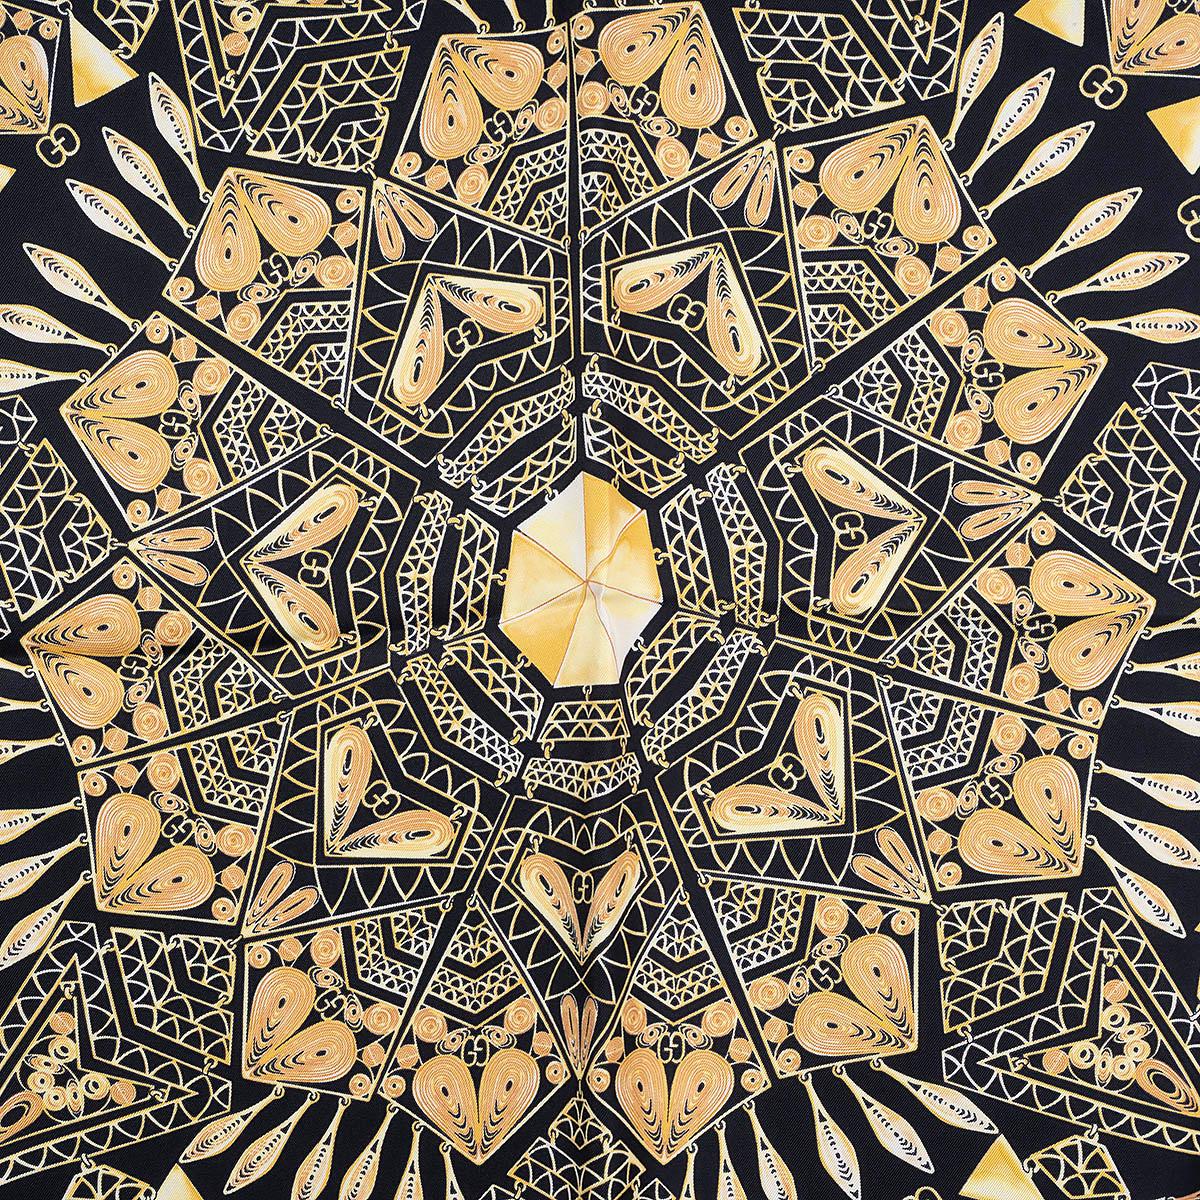 100% authentic Gucci Mandala 90 scarf in black, beige and gold silk (100%). Has been worn and is in excellent condition. 

Measurements
Width	90cm (35.1in)
Length	90cm (35.1in)

All our listings include only the listed item unless otherwise